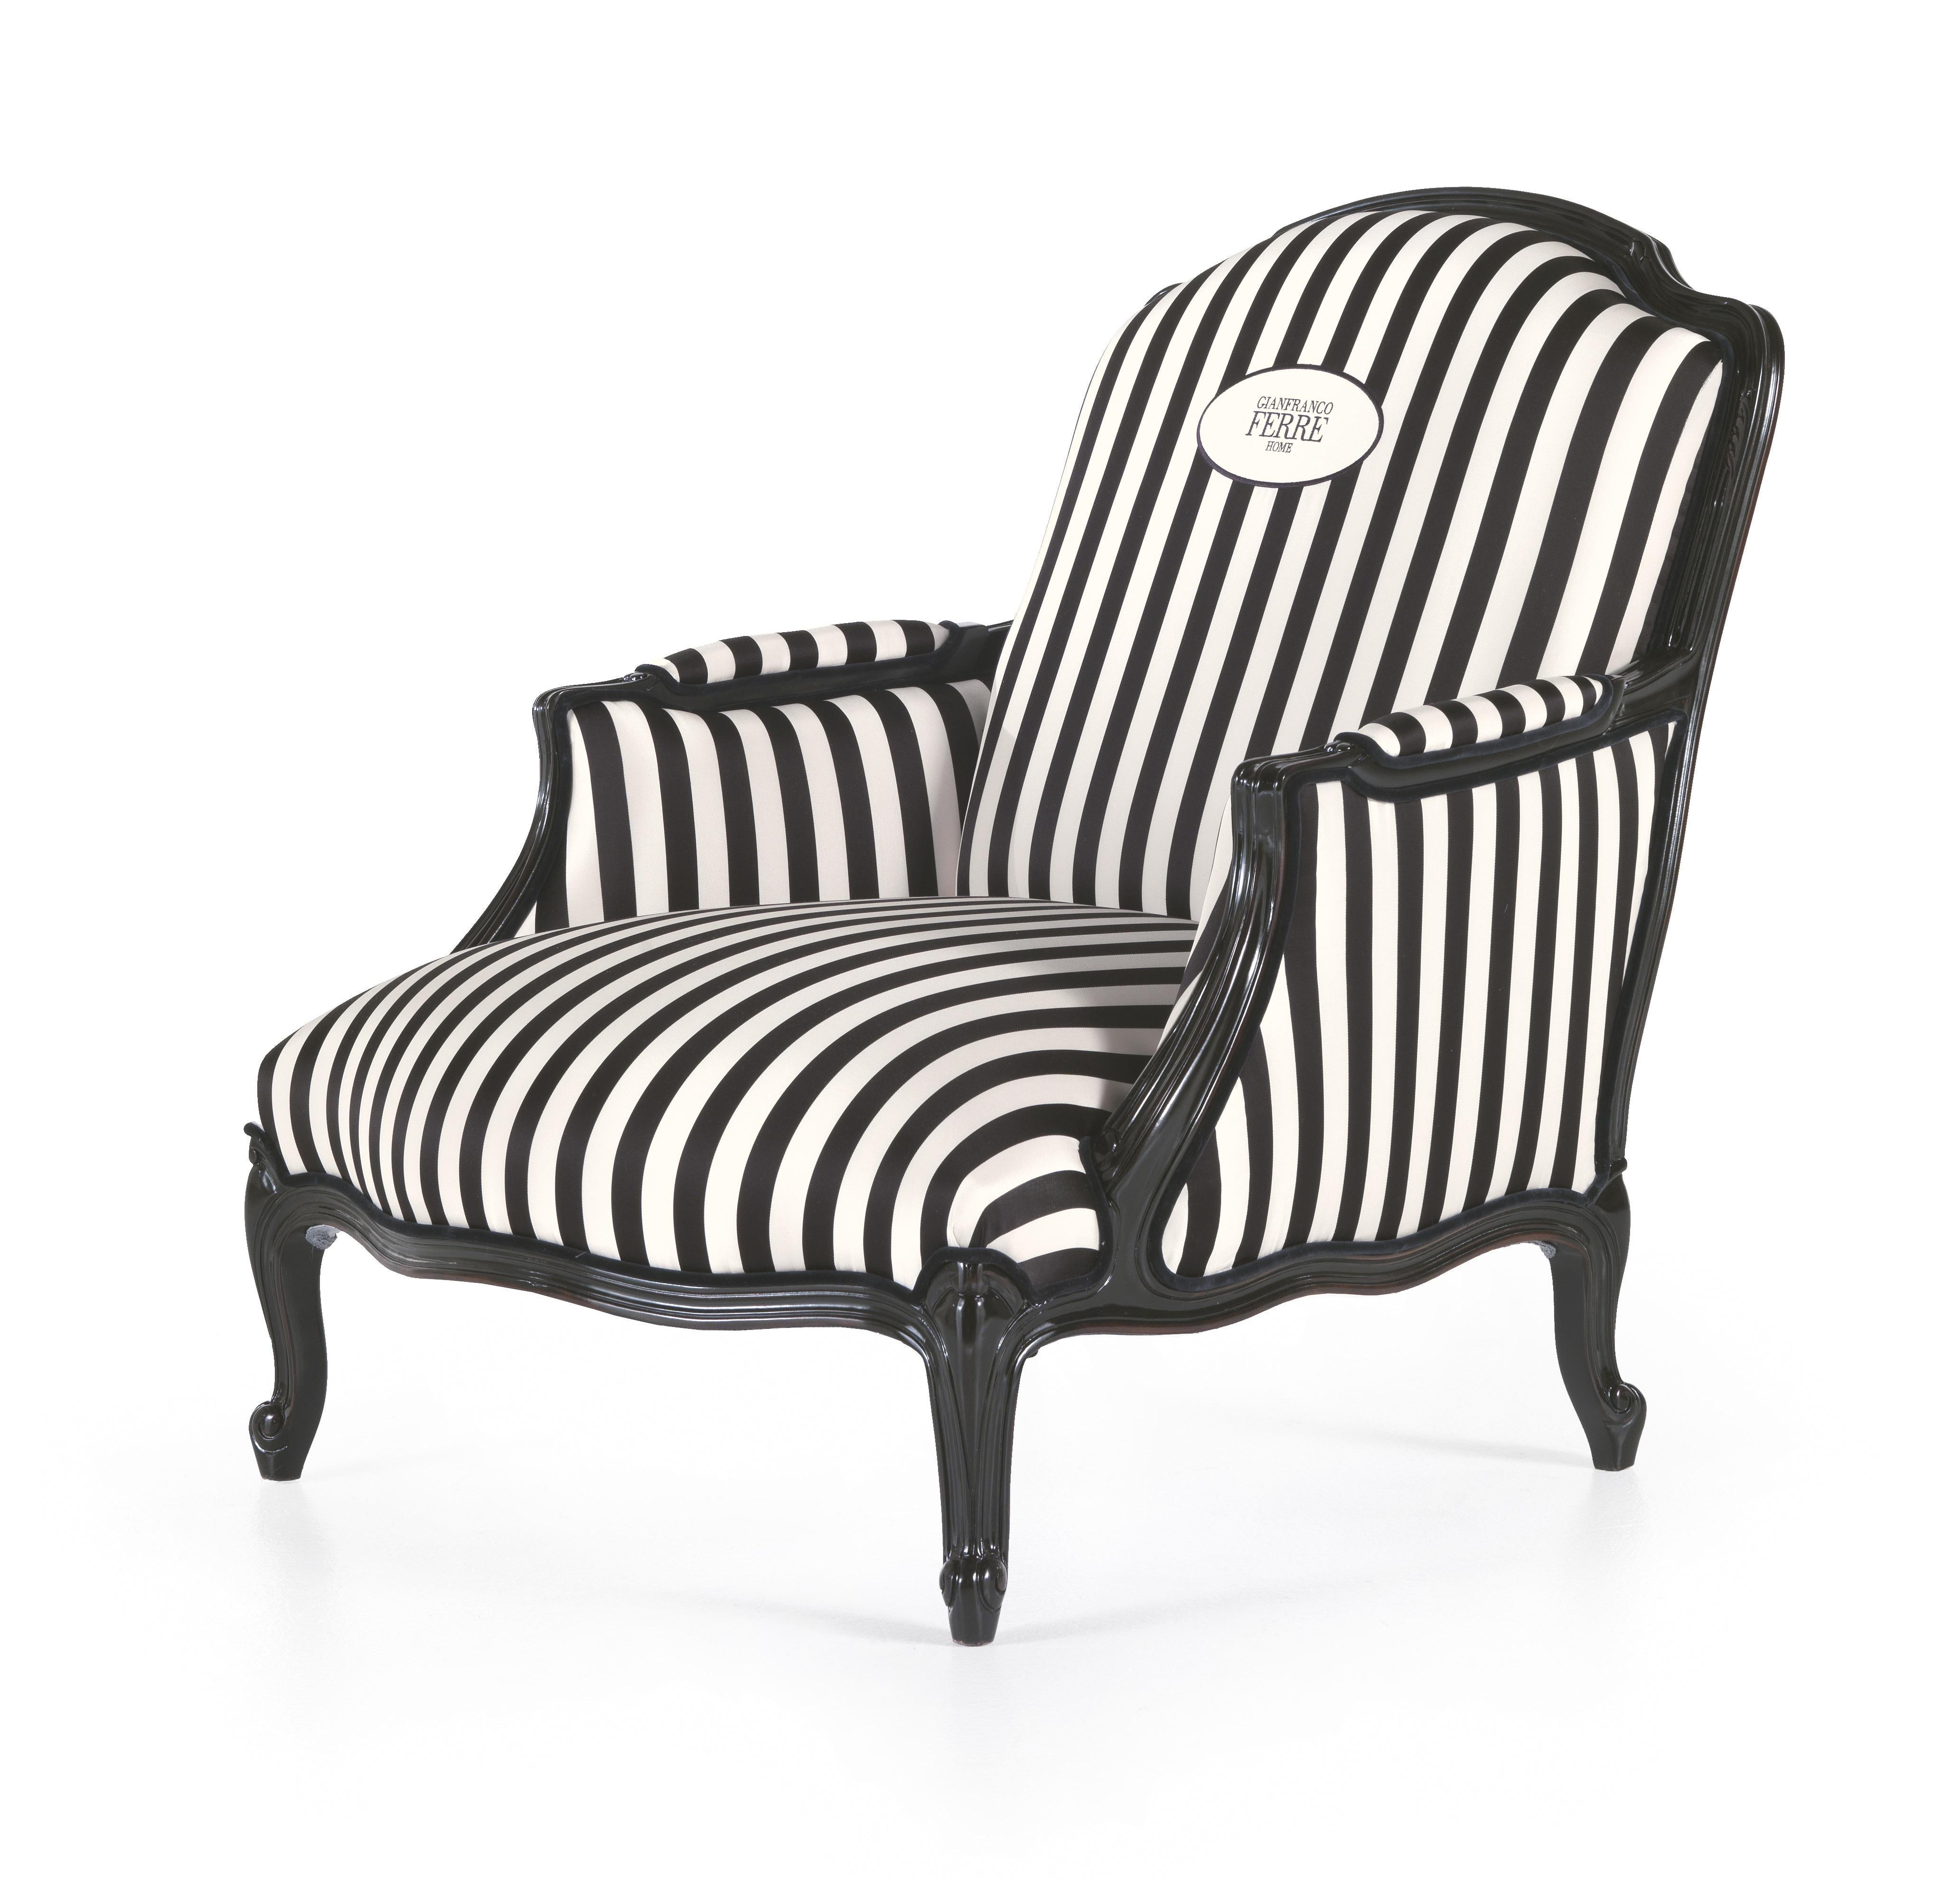 An armchair that interprets in an original way the timeless white-and-black stripes, combining them with classical Louis XV style legs and armrests. An eclectic and eccentric set with an unmistakable Gianfranco Ferrè Home style.

Structure in beech